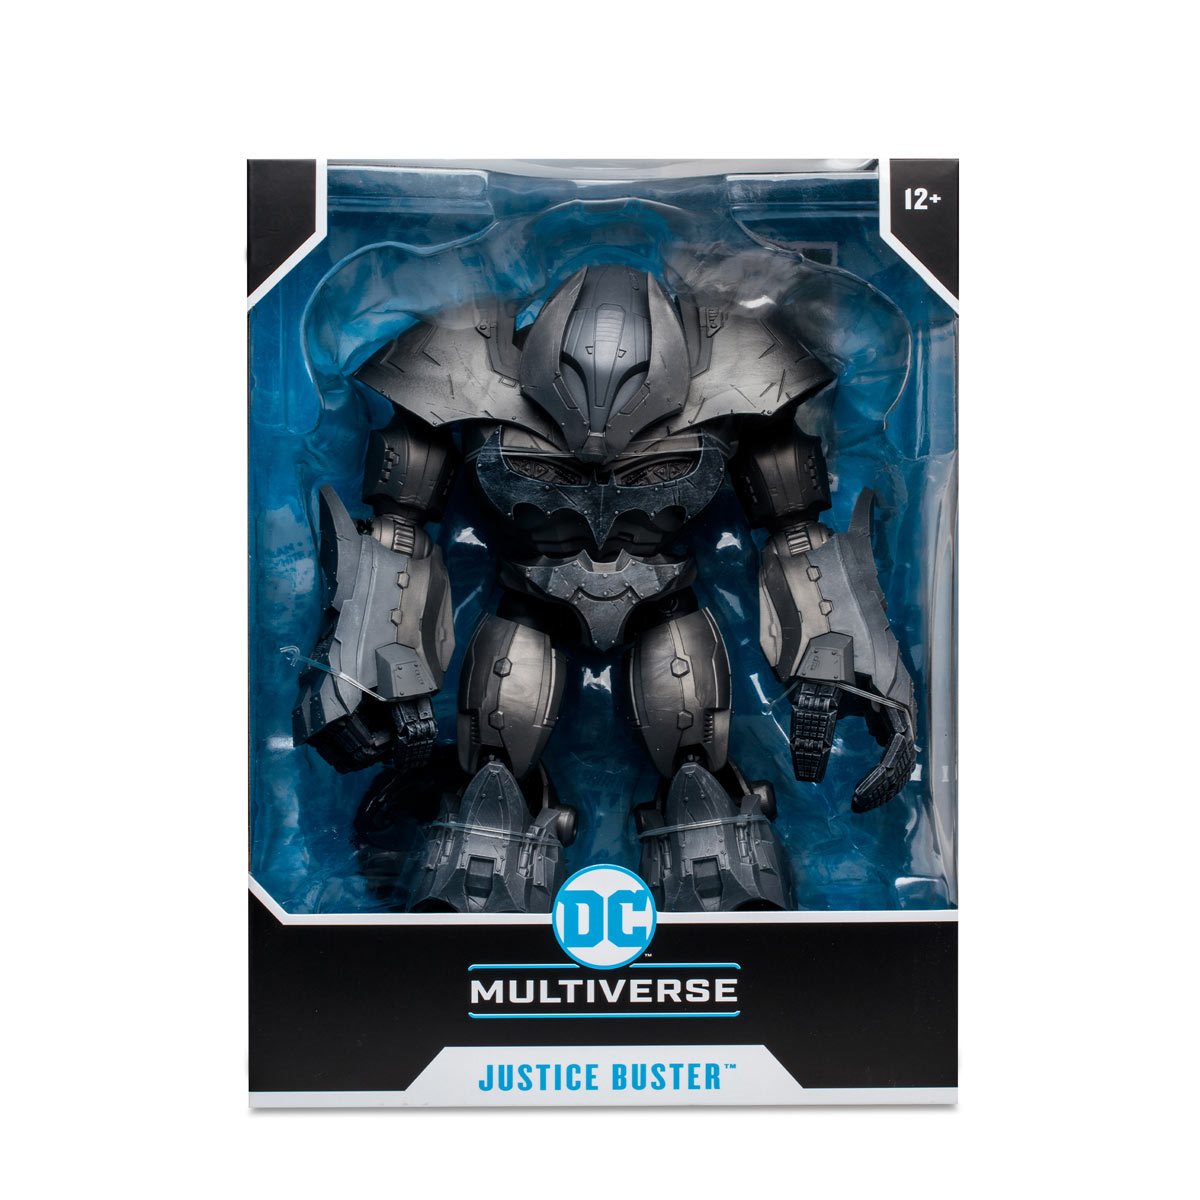 DC Collector Megafig Wave 6 Batman: Endgame Justice Buster Batsuit Action Figure in a box front view - Heretoserveyou